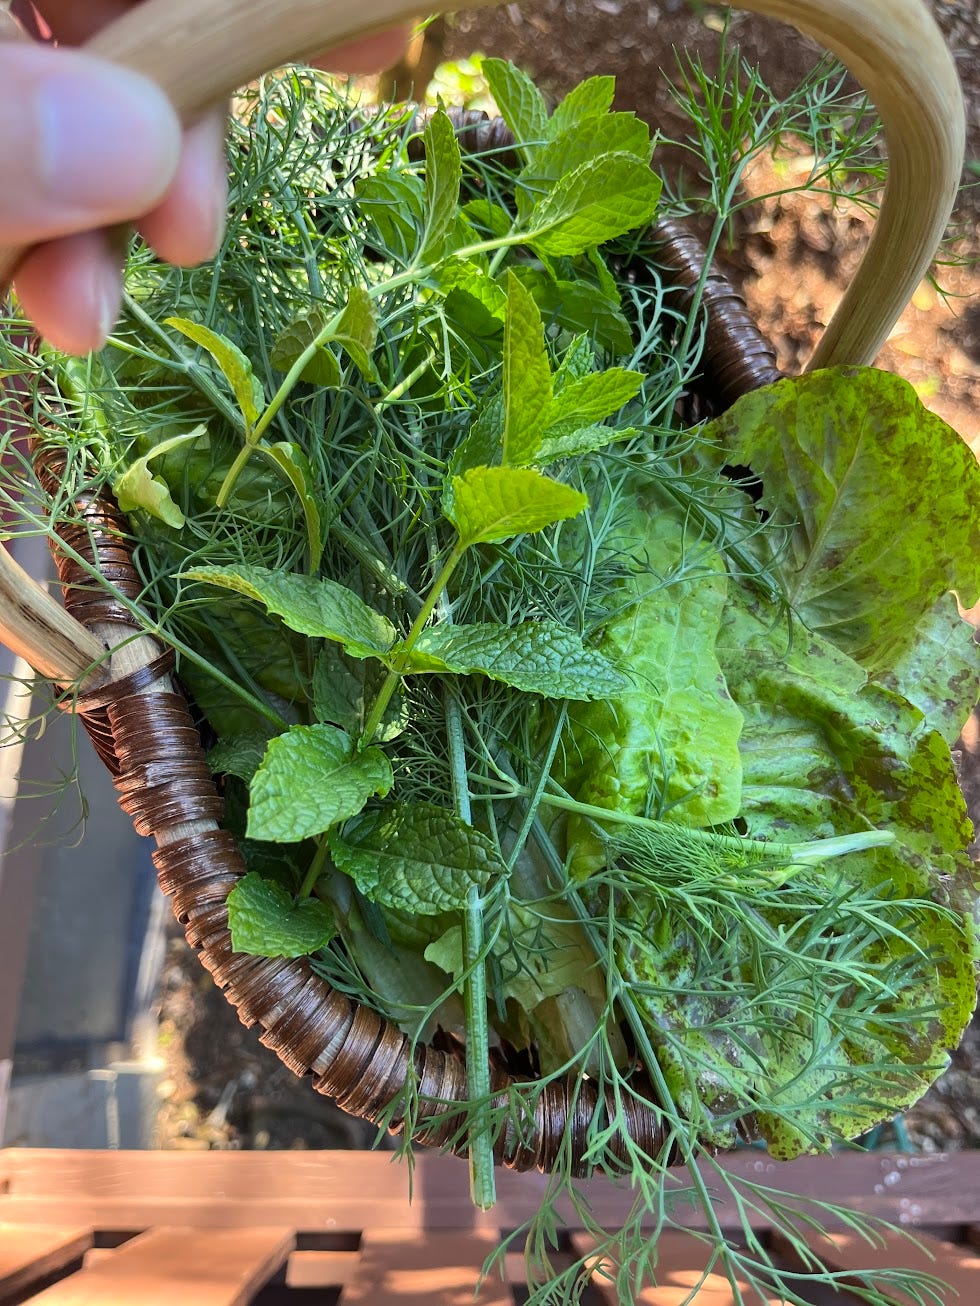 A hand holding a harvest basket of lettuce and herbs